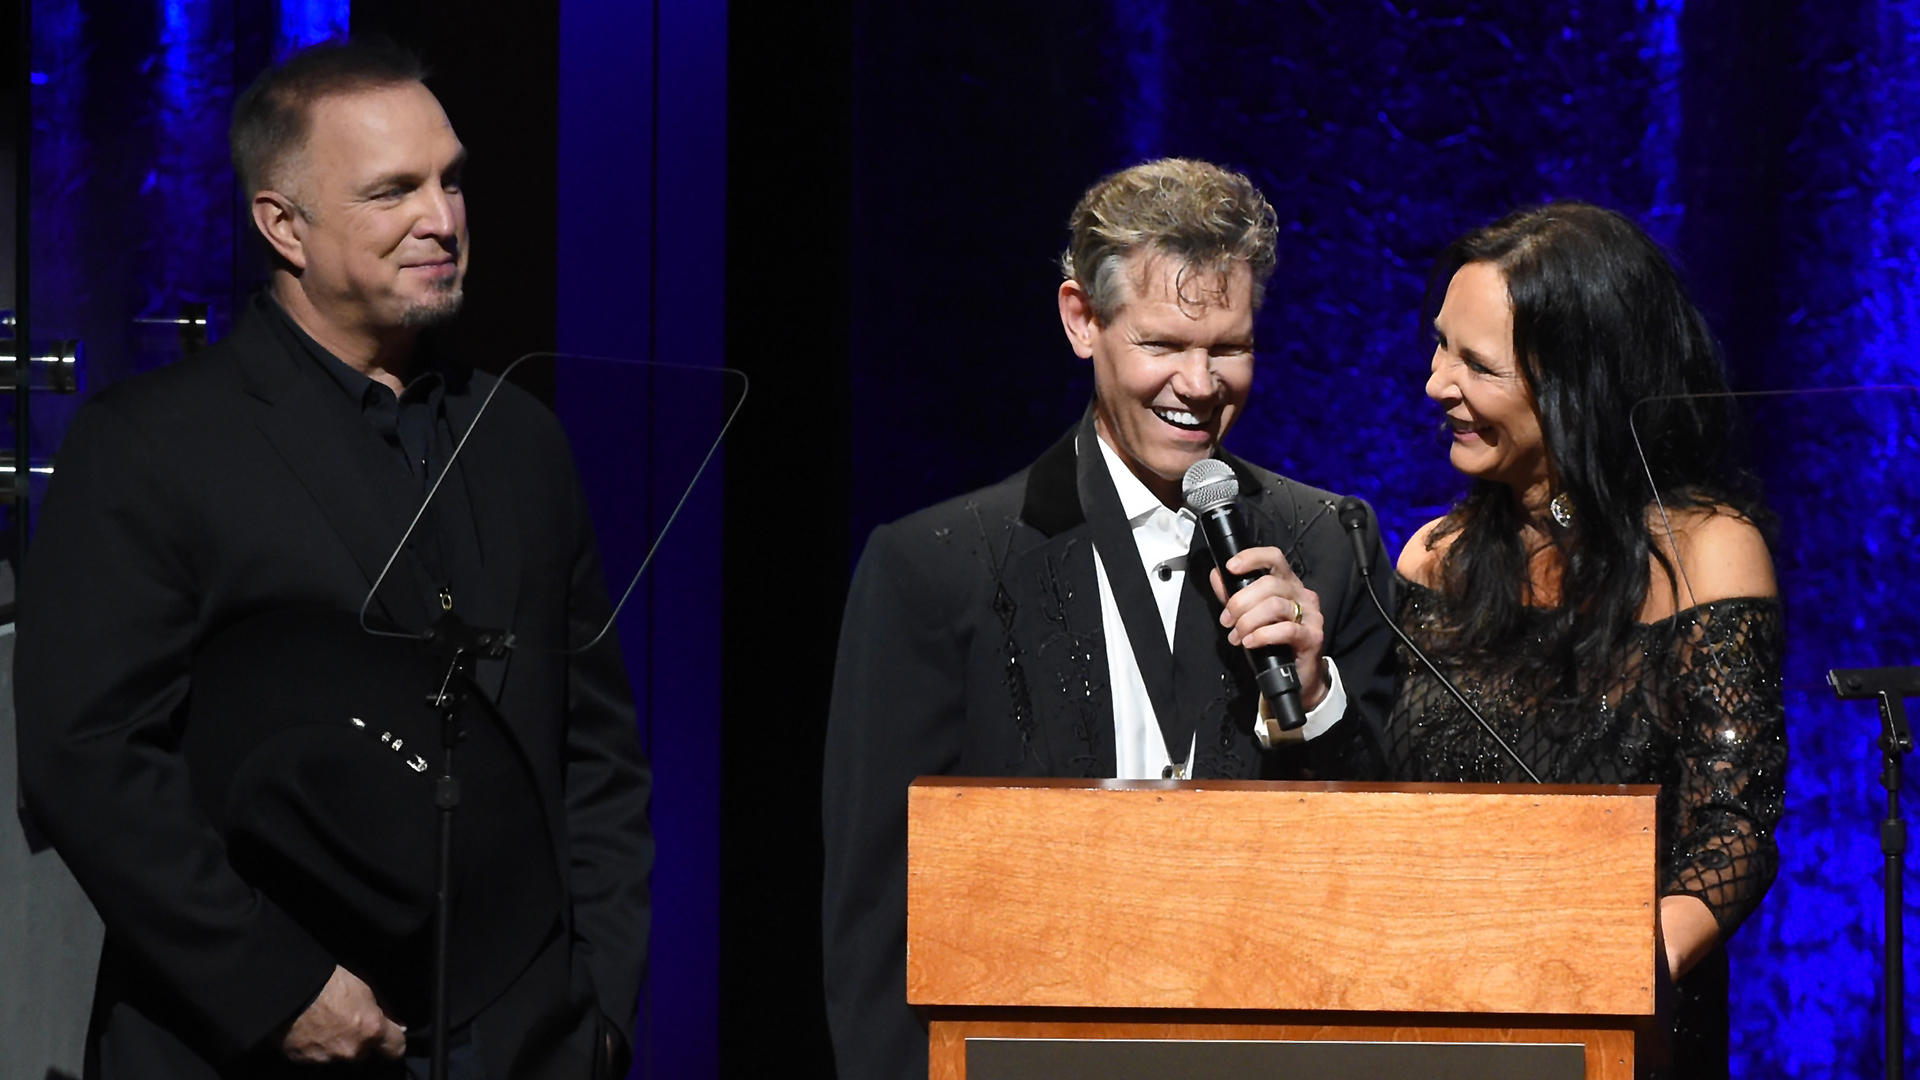 more than a decade after a stroke, randy travis sings again, courtesy of ai